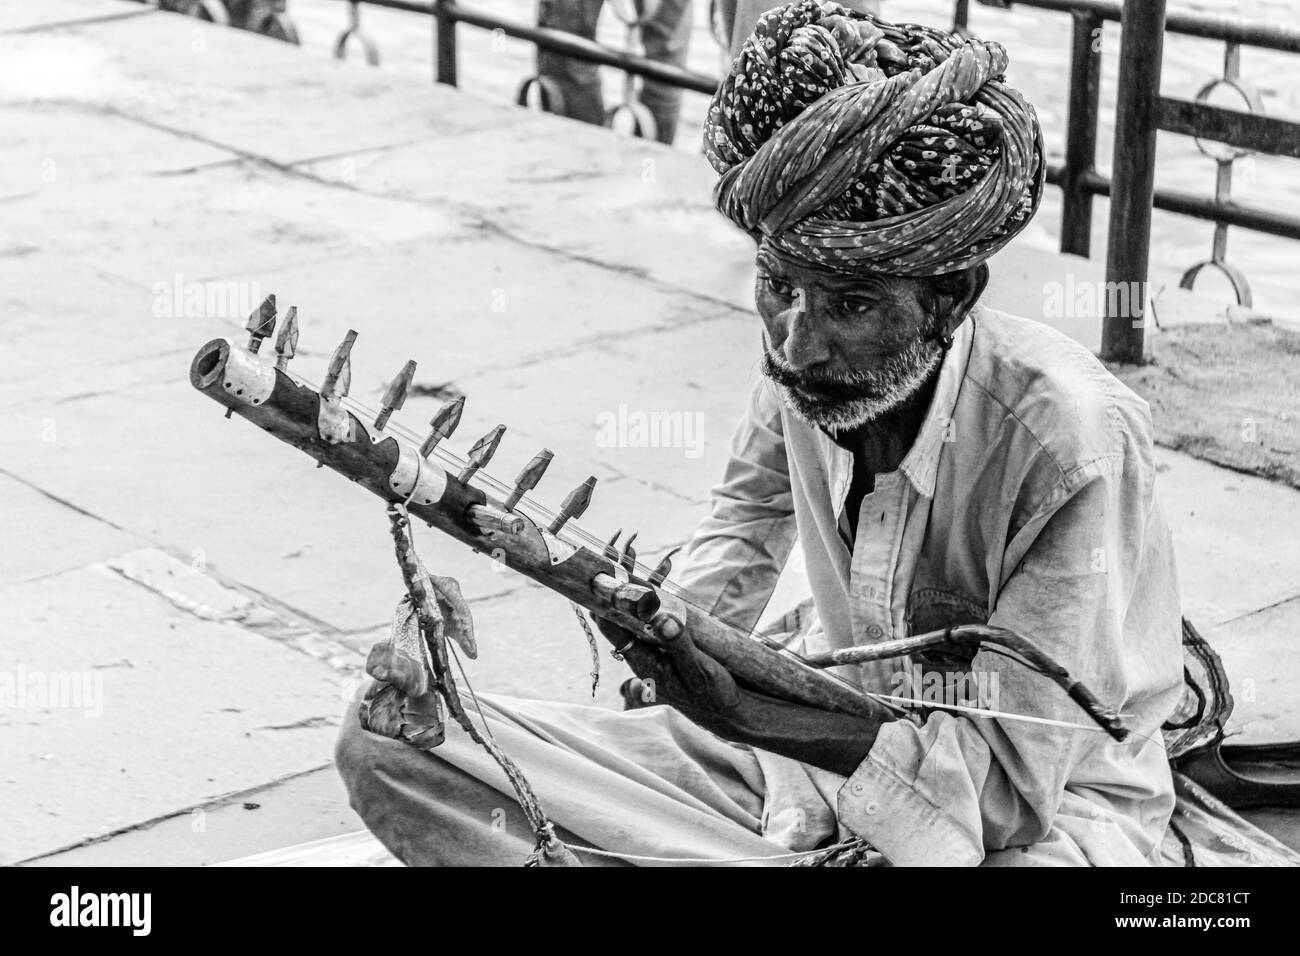 the roadside poor musician/ street artist playing a traditional instrument of Rajasthan called ravanhatha Stock Photo